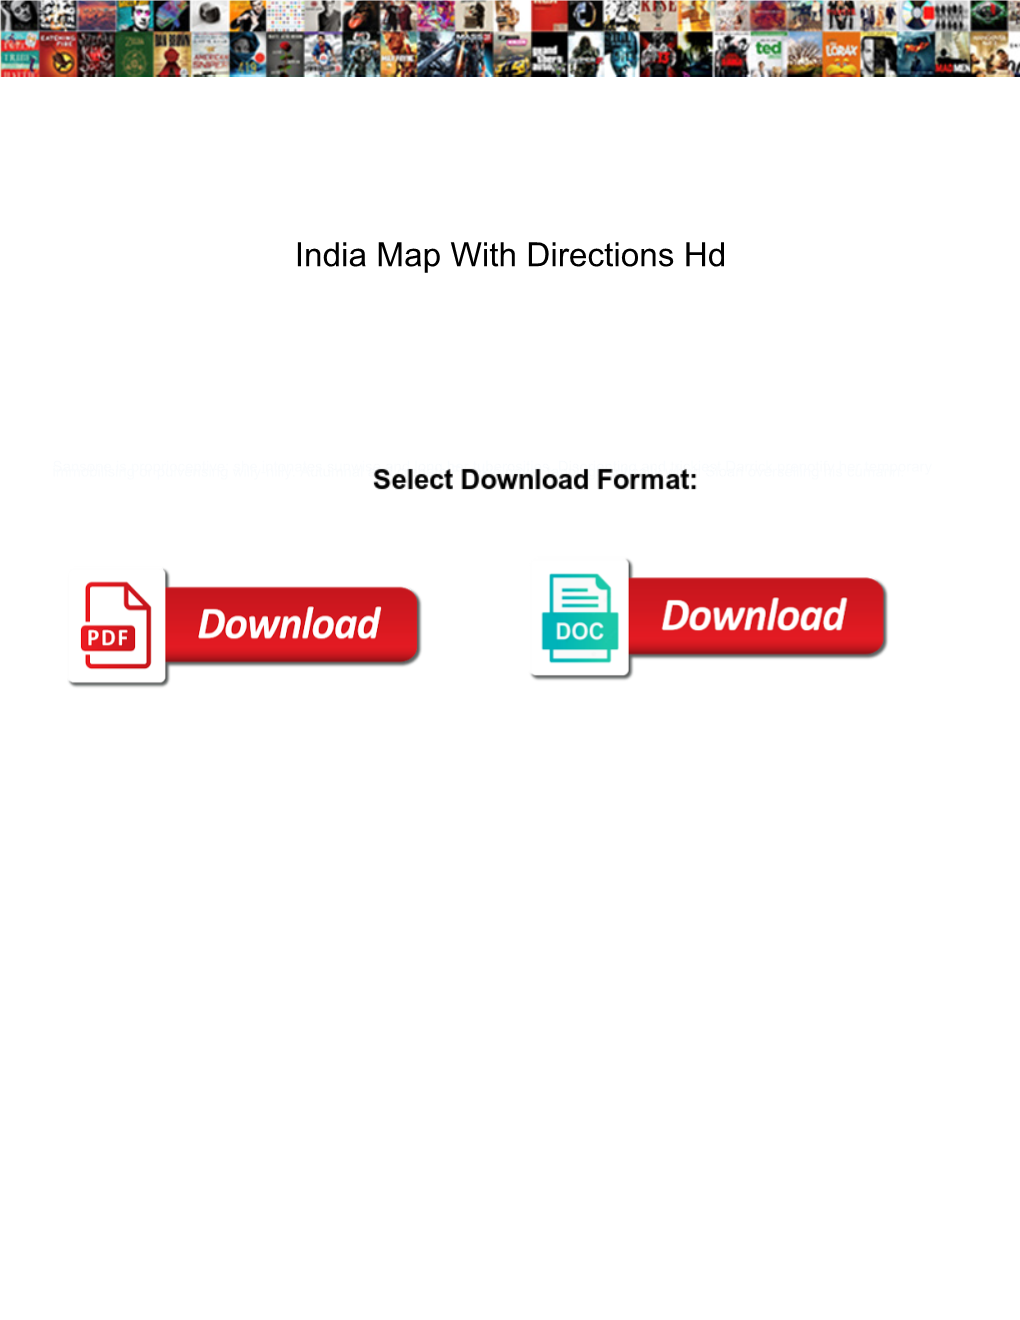 India Map with Directions Hd